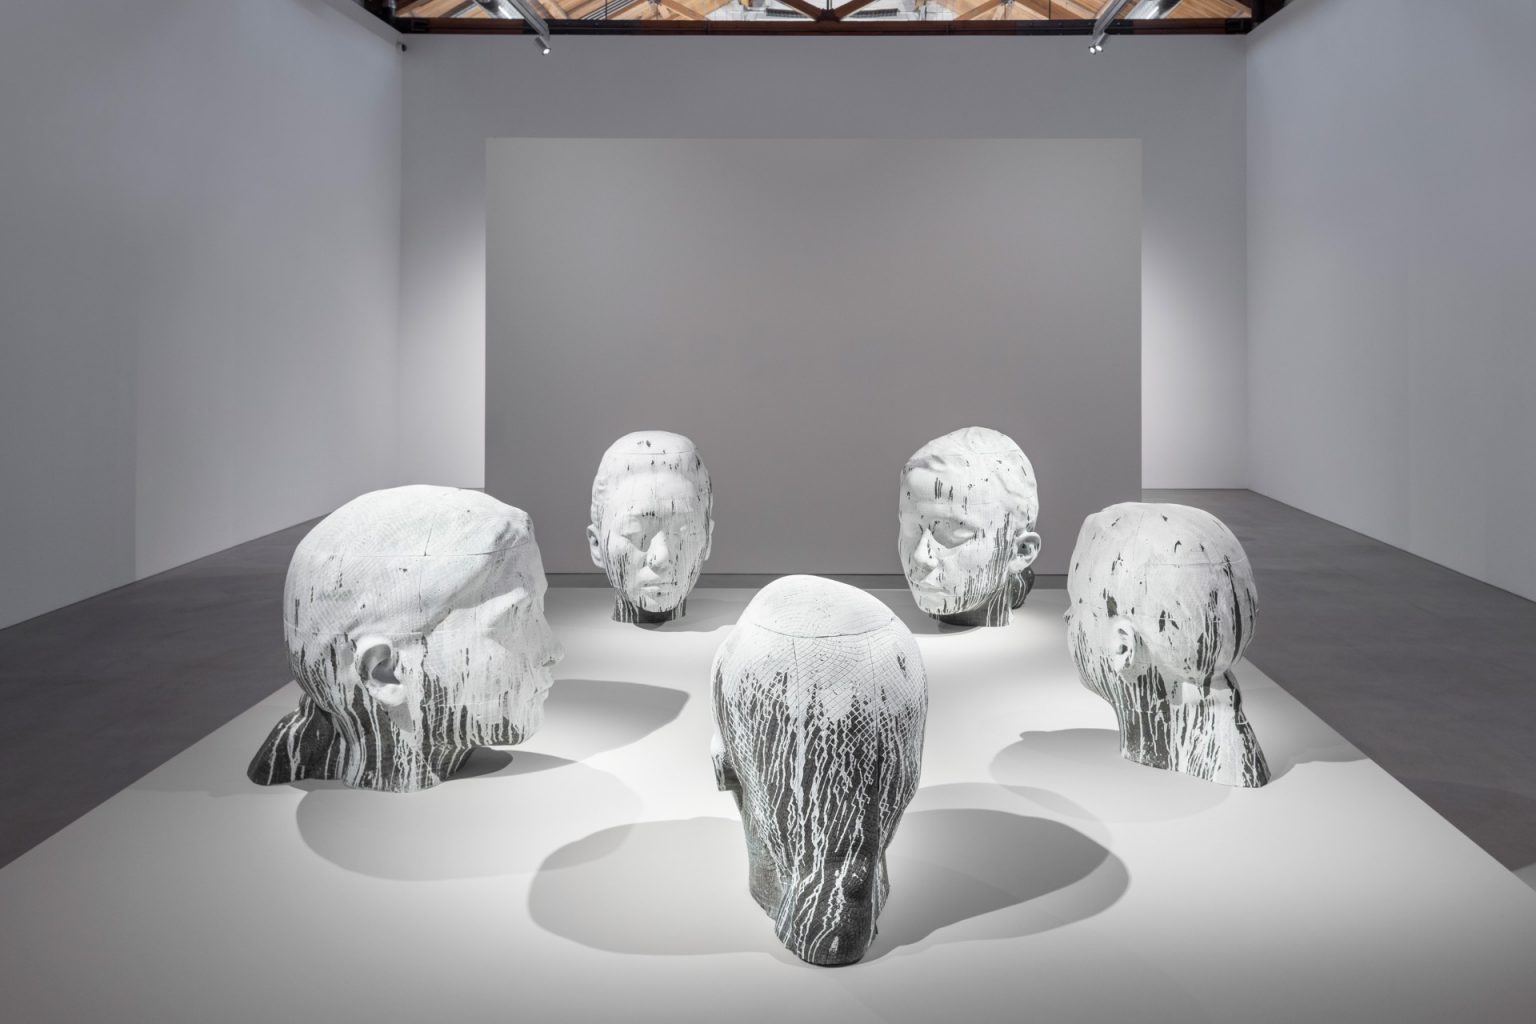 Nocturne Is Jaume Plensa’s Dramatic Exhibition Of Sculptural ...